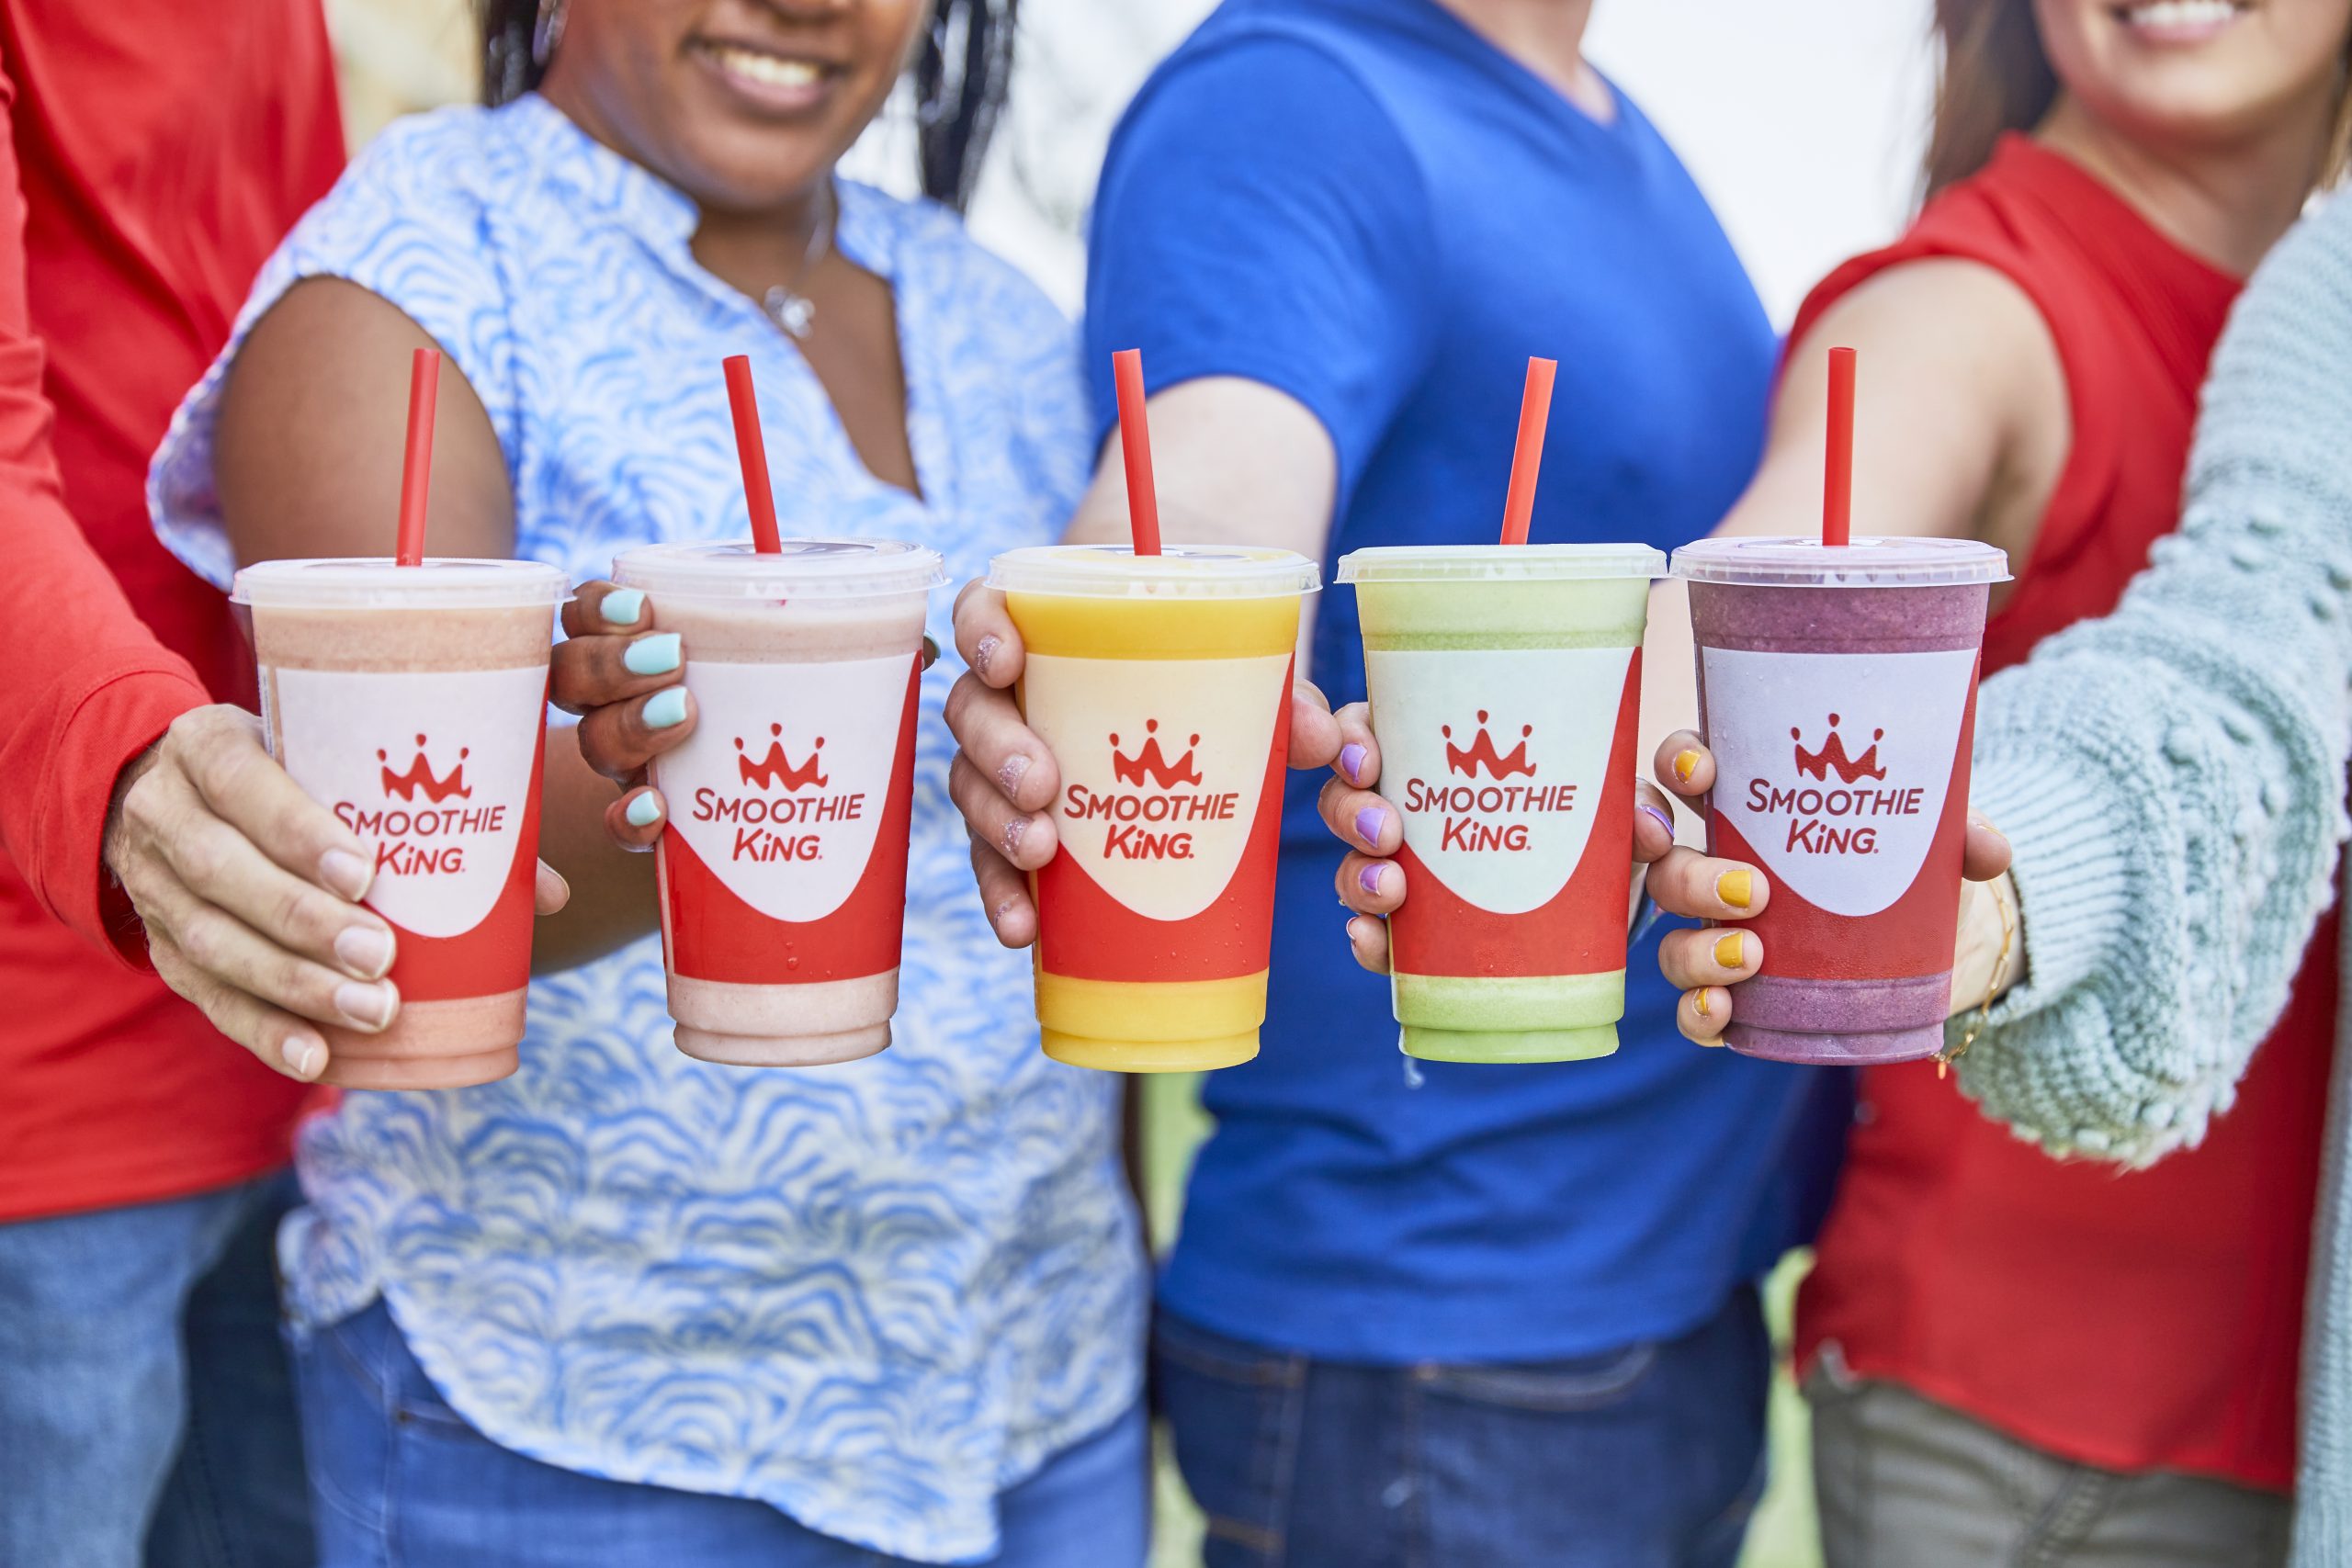 A vibrant assortment of fresh fruits blended into a delicious smoothie at the fruit smoothie franchise.